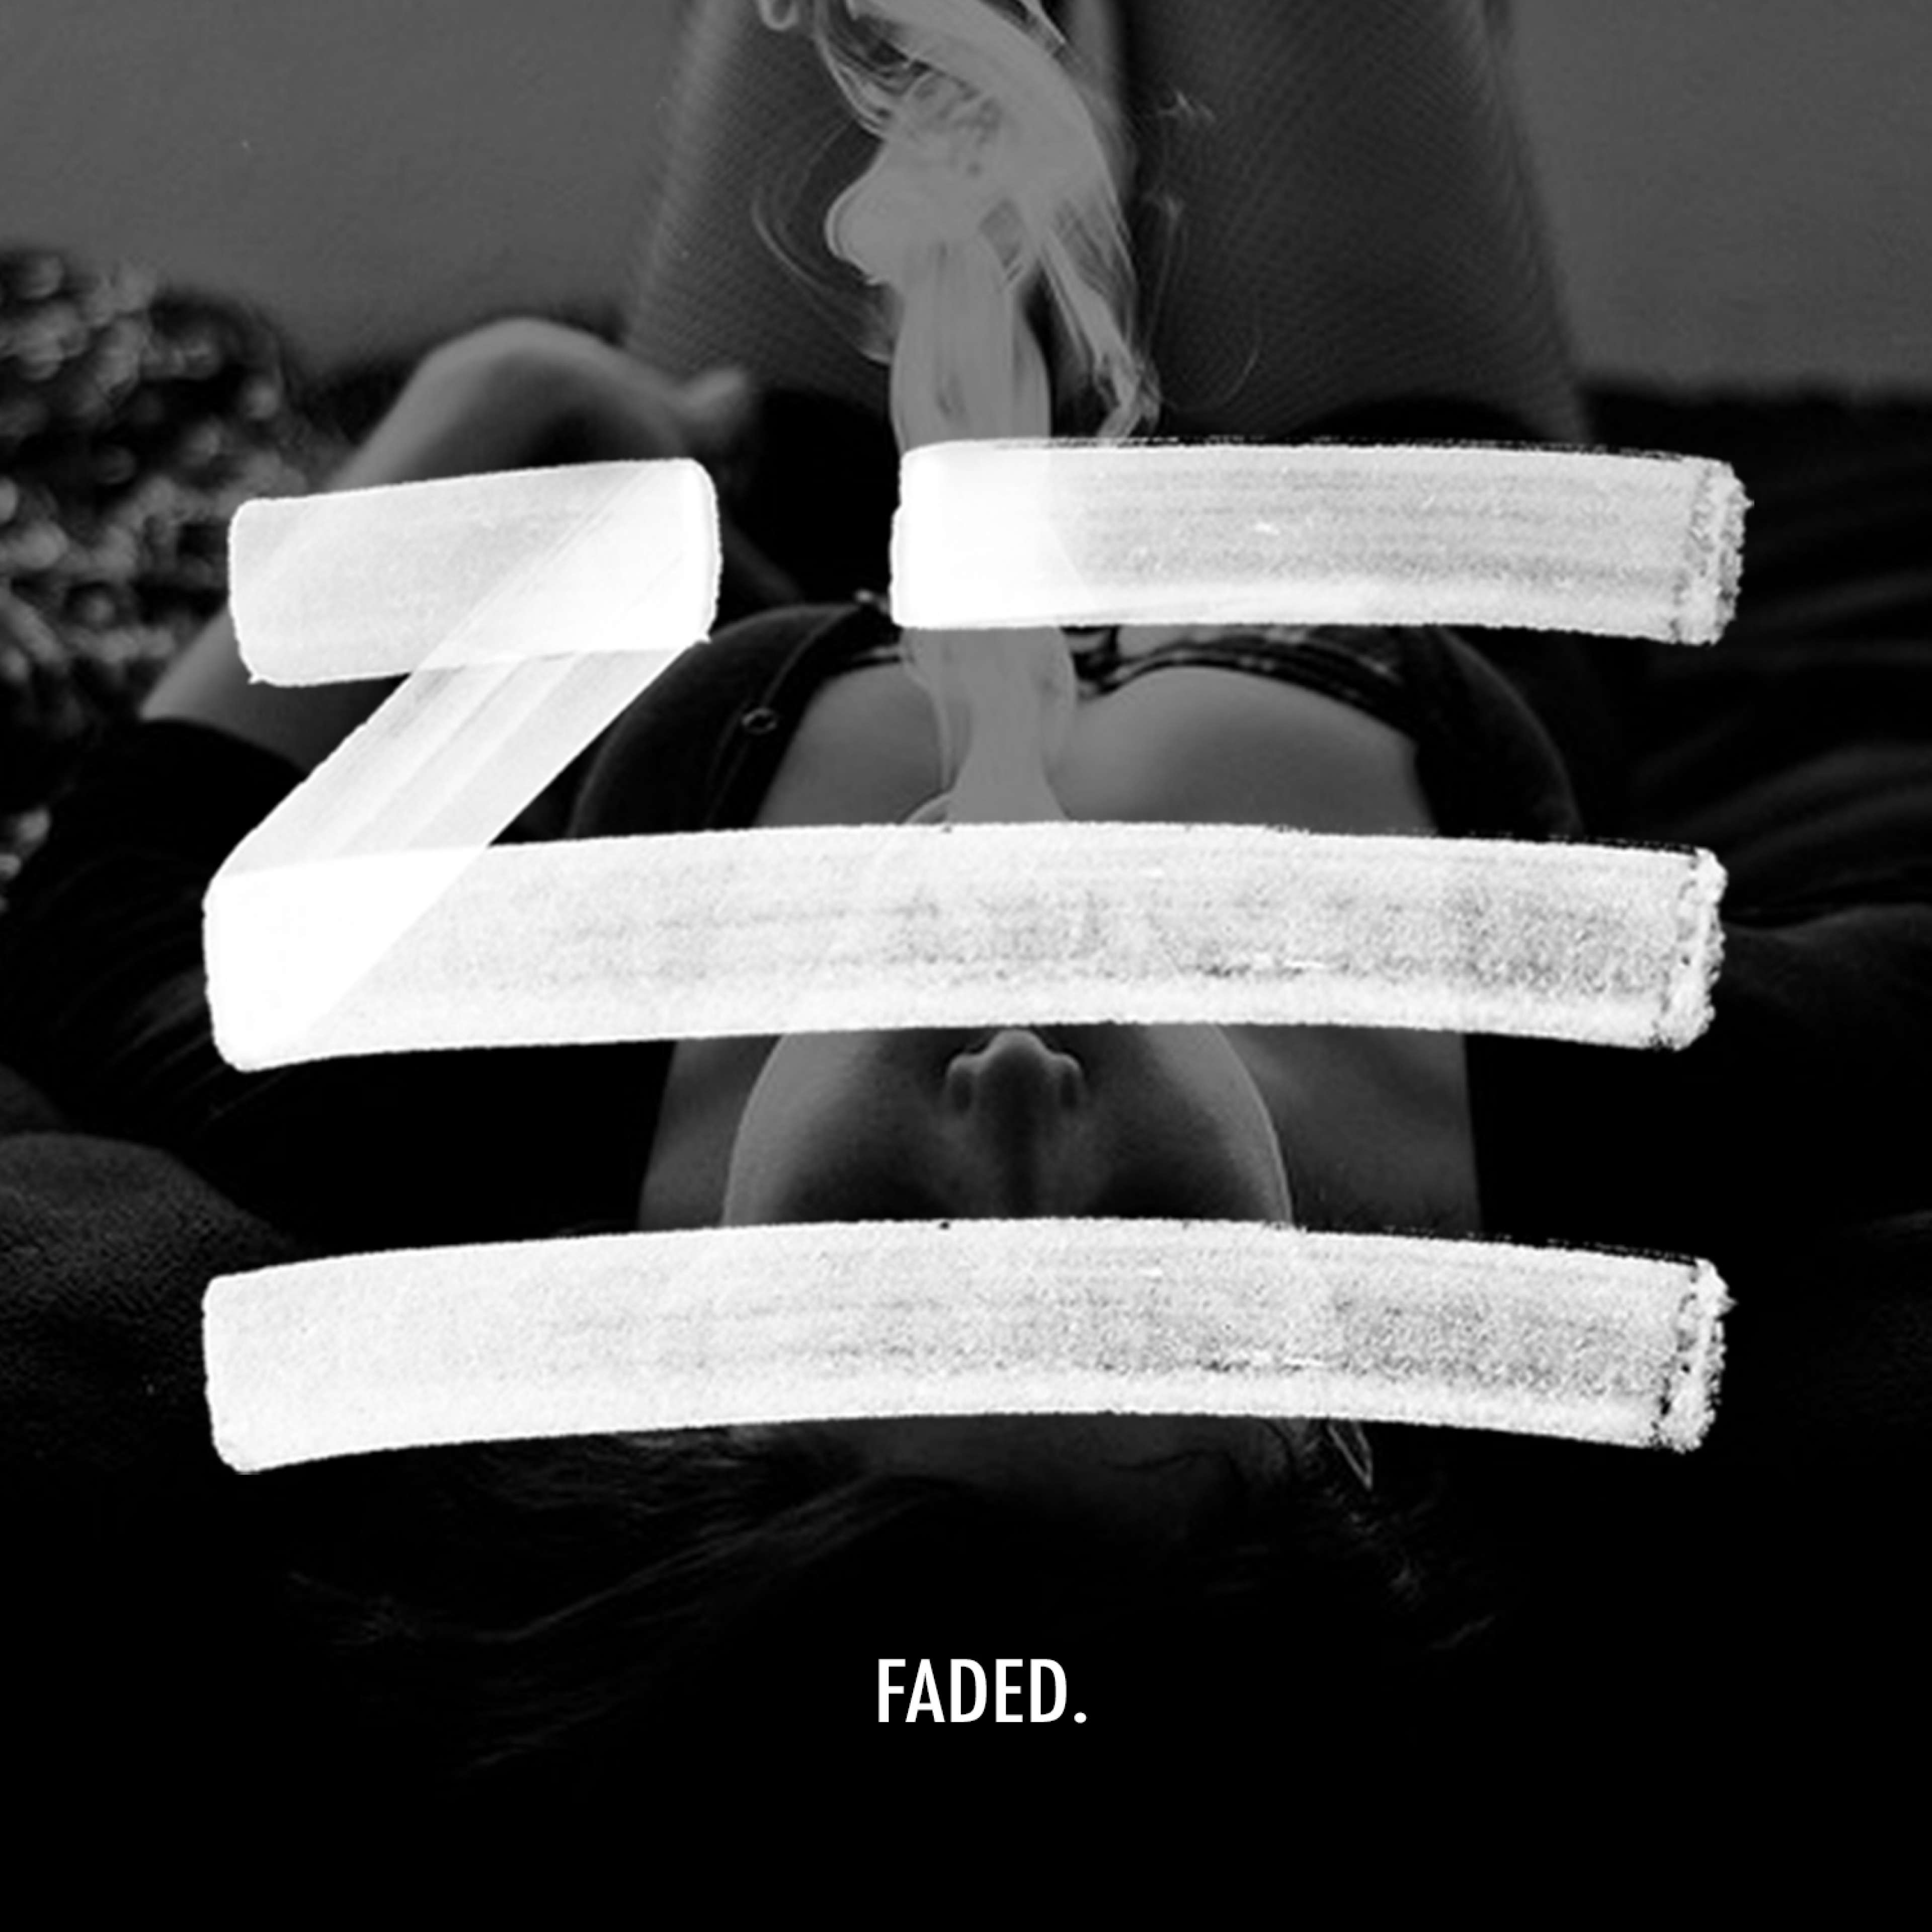 ZHU drops another track from the Genesis Series